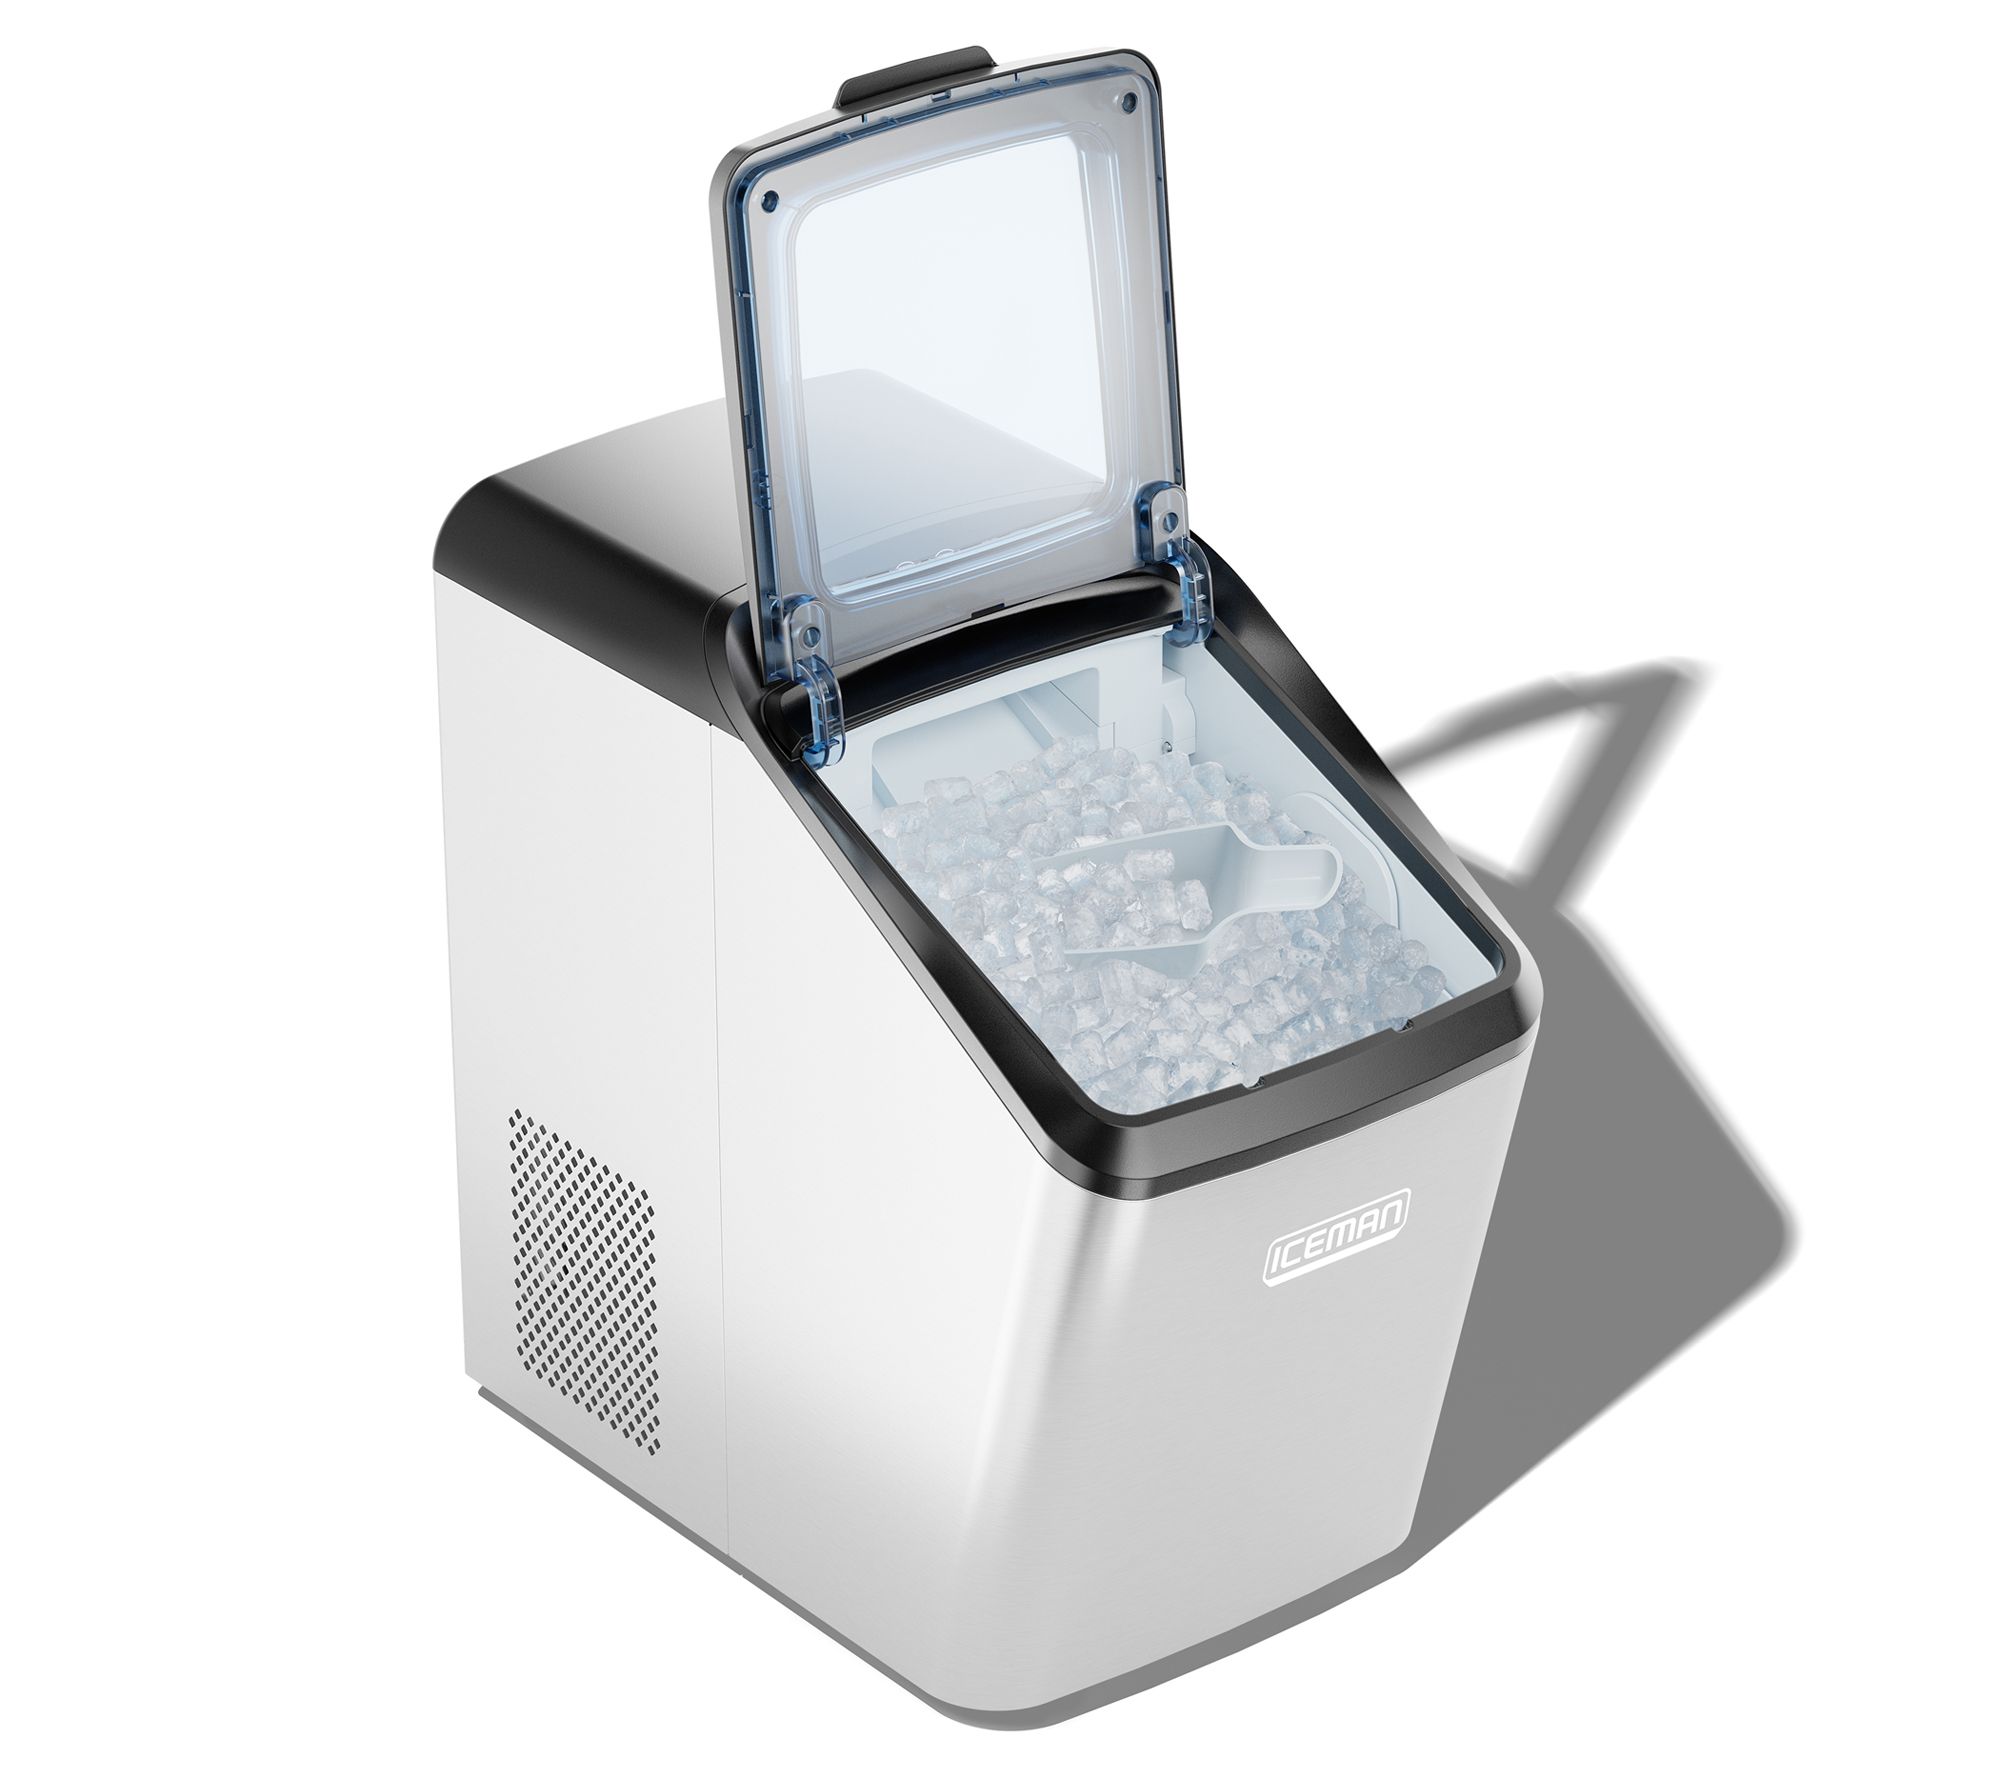 Orgo The Sonic Countertop Ice Maker, – THE ICE HOUSE